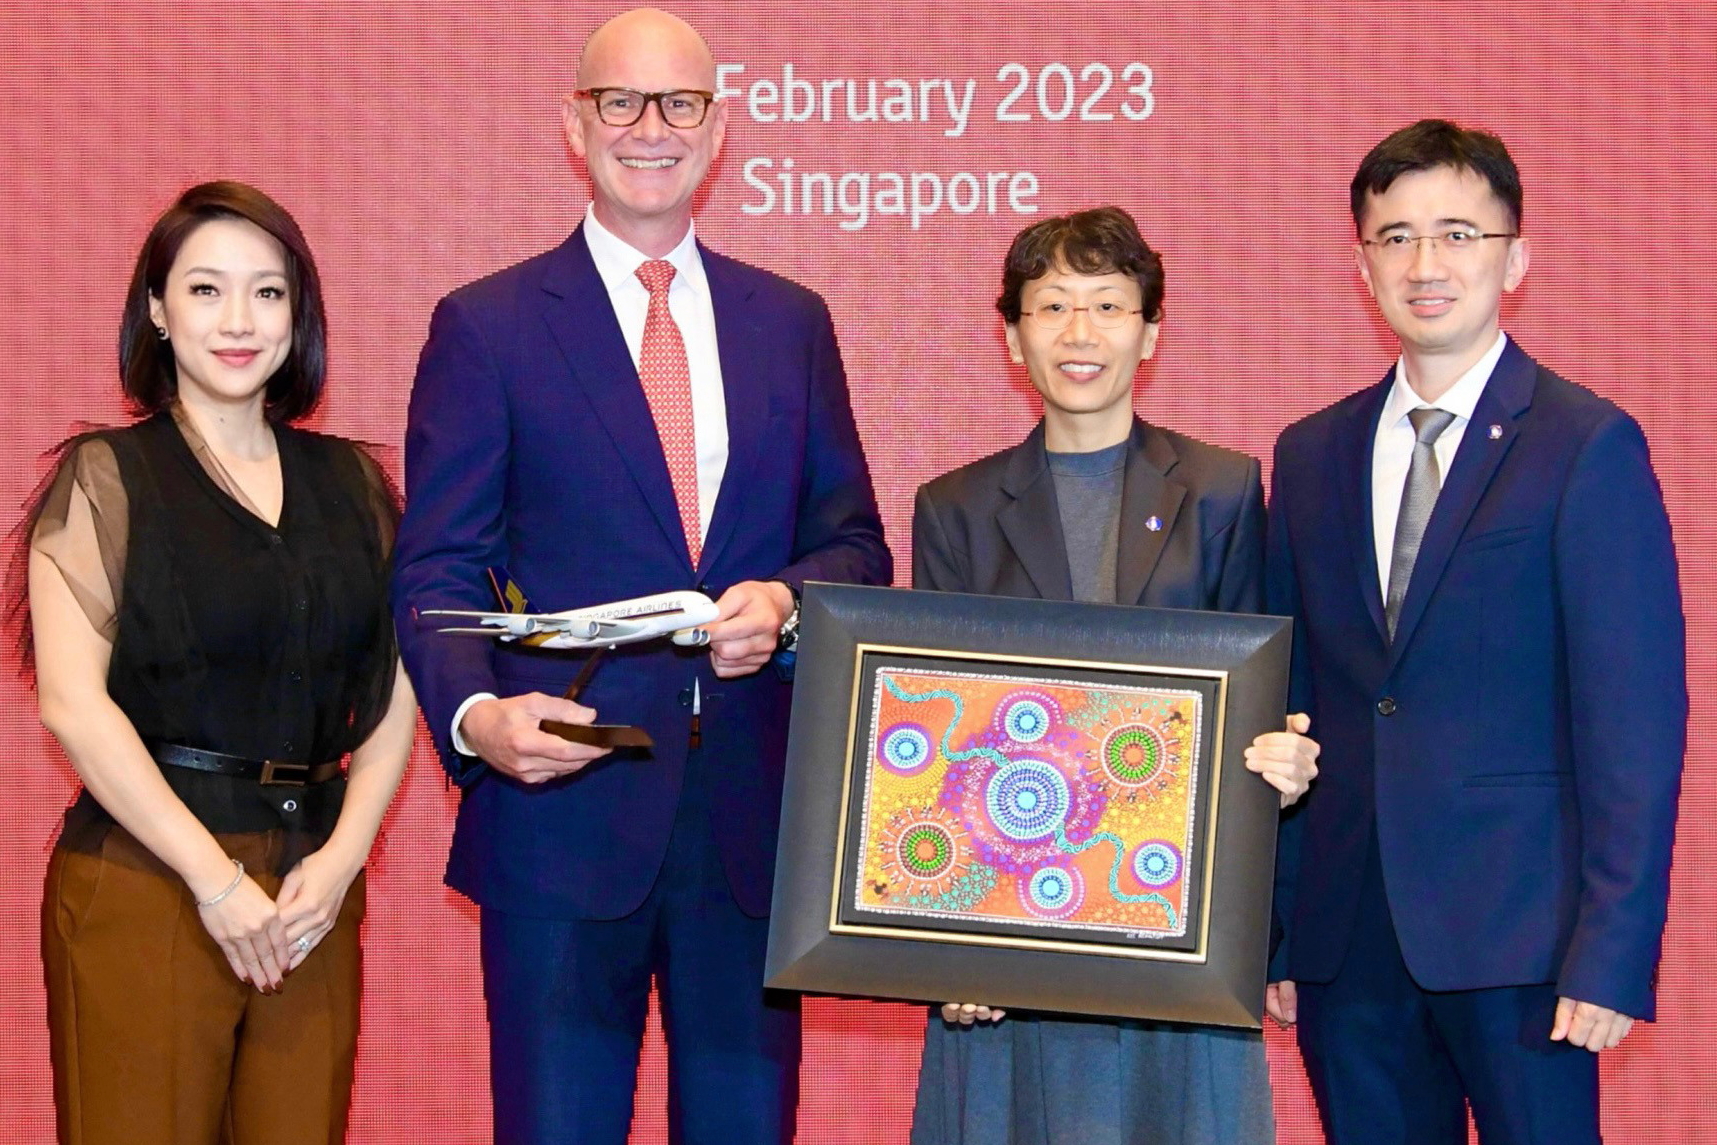 From left: LC Tan, Regional Business Events Director - Asia, Tourism Australia; Andrew Hogg, Executive General Manager Eastern Markets and Aviation, Tourism Australia; JoAnn Tan, Senior Vice President Marketing Planning, Singapore Airlines; and Ng Yung Han, Vice President Global & Corporate Sales, Singapore Airlines. Click to enlarge.